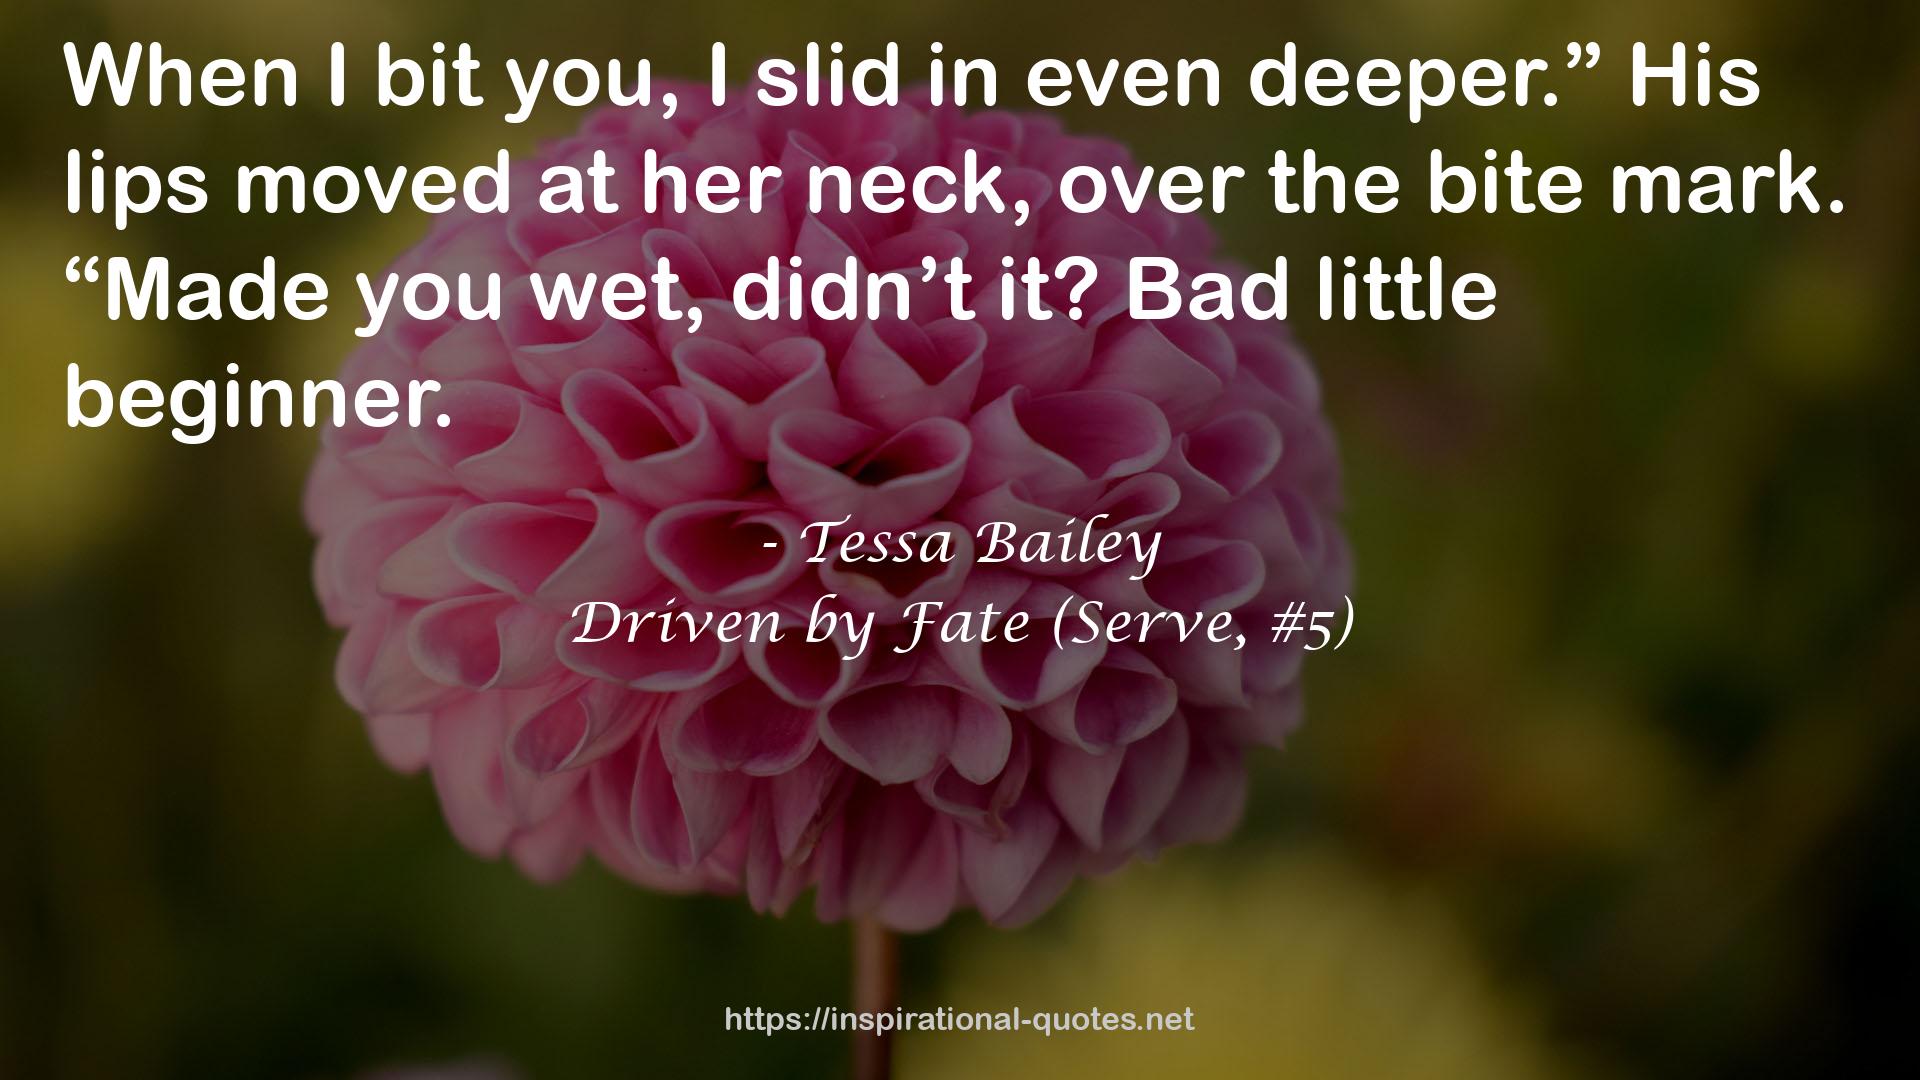 Driven by Fate (Serve, #5) QUOTES